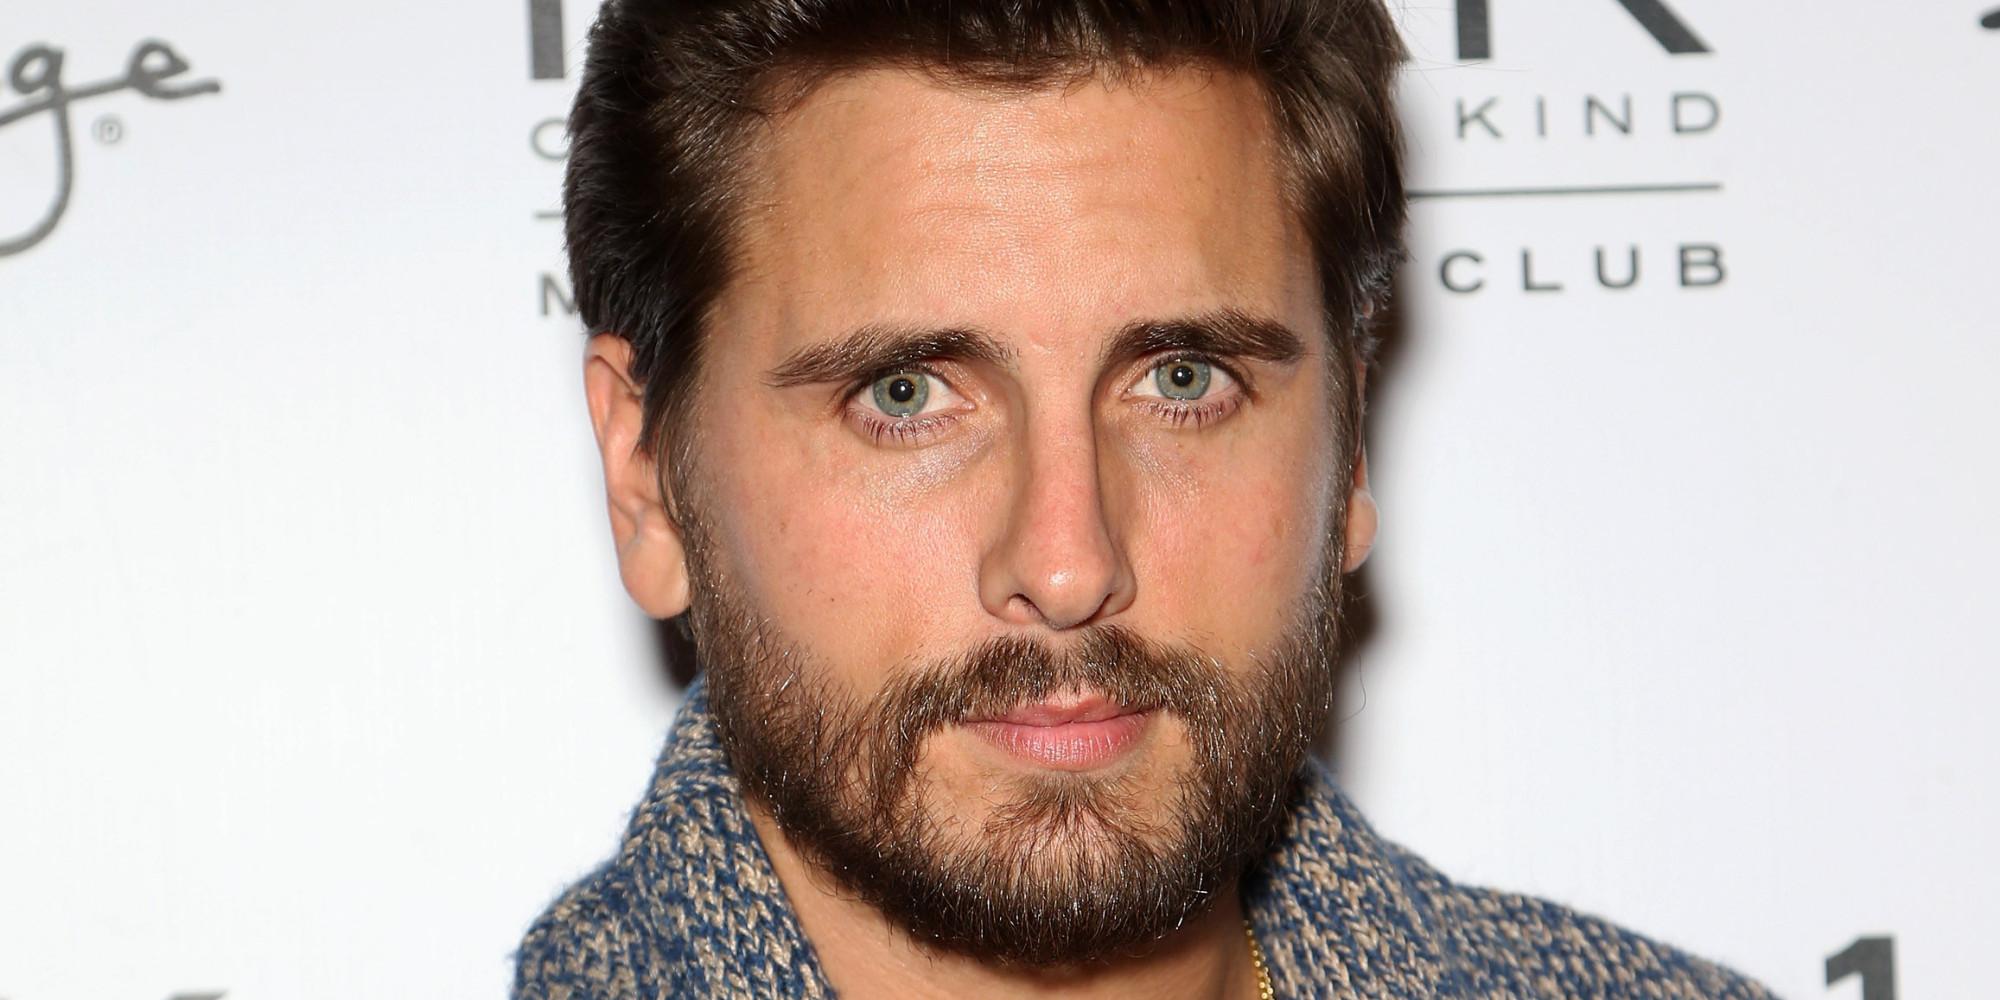 Scott Disick Reportedly Partied With Friends Just Weeks After Third